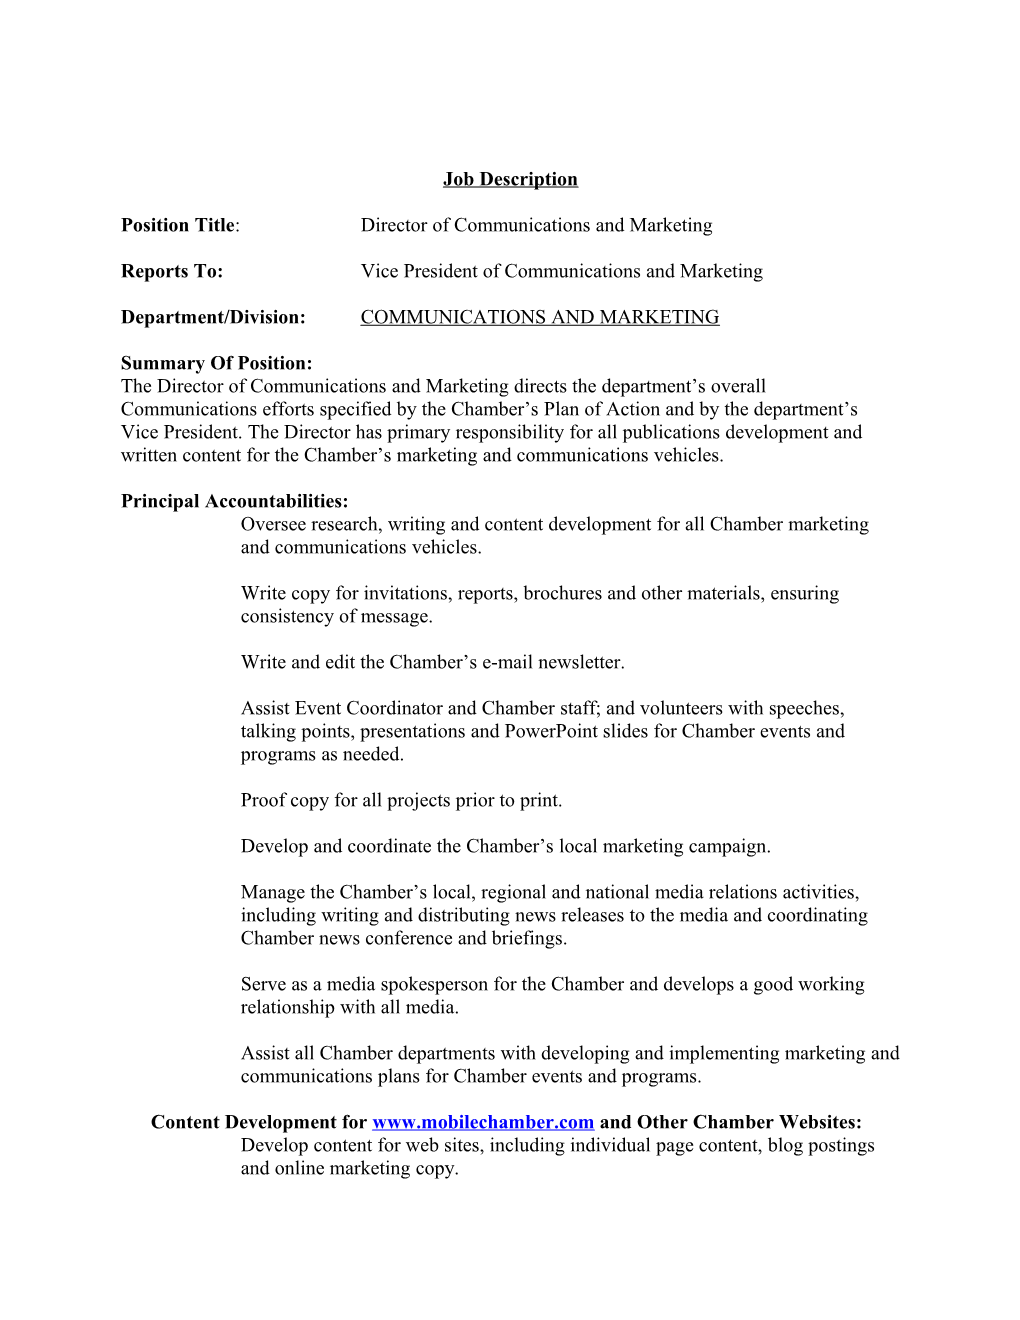 Position Title:Director of Communications and Marketing